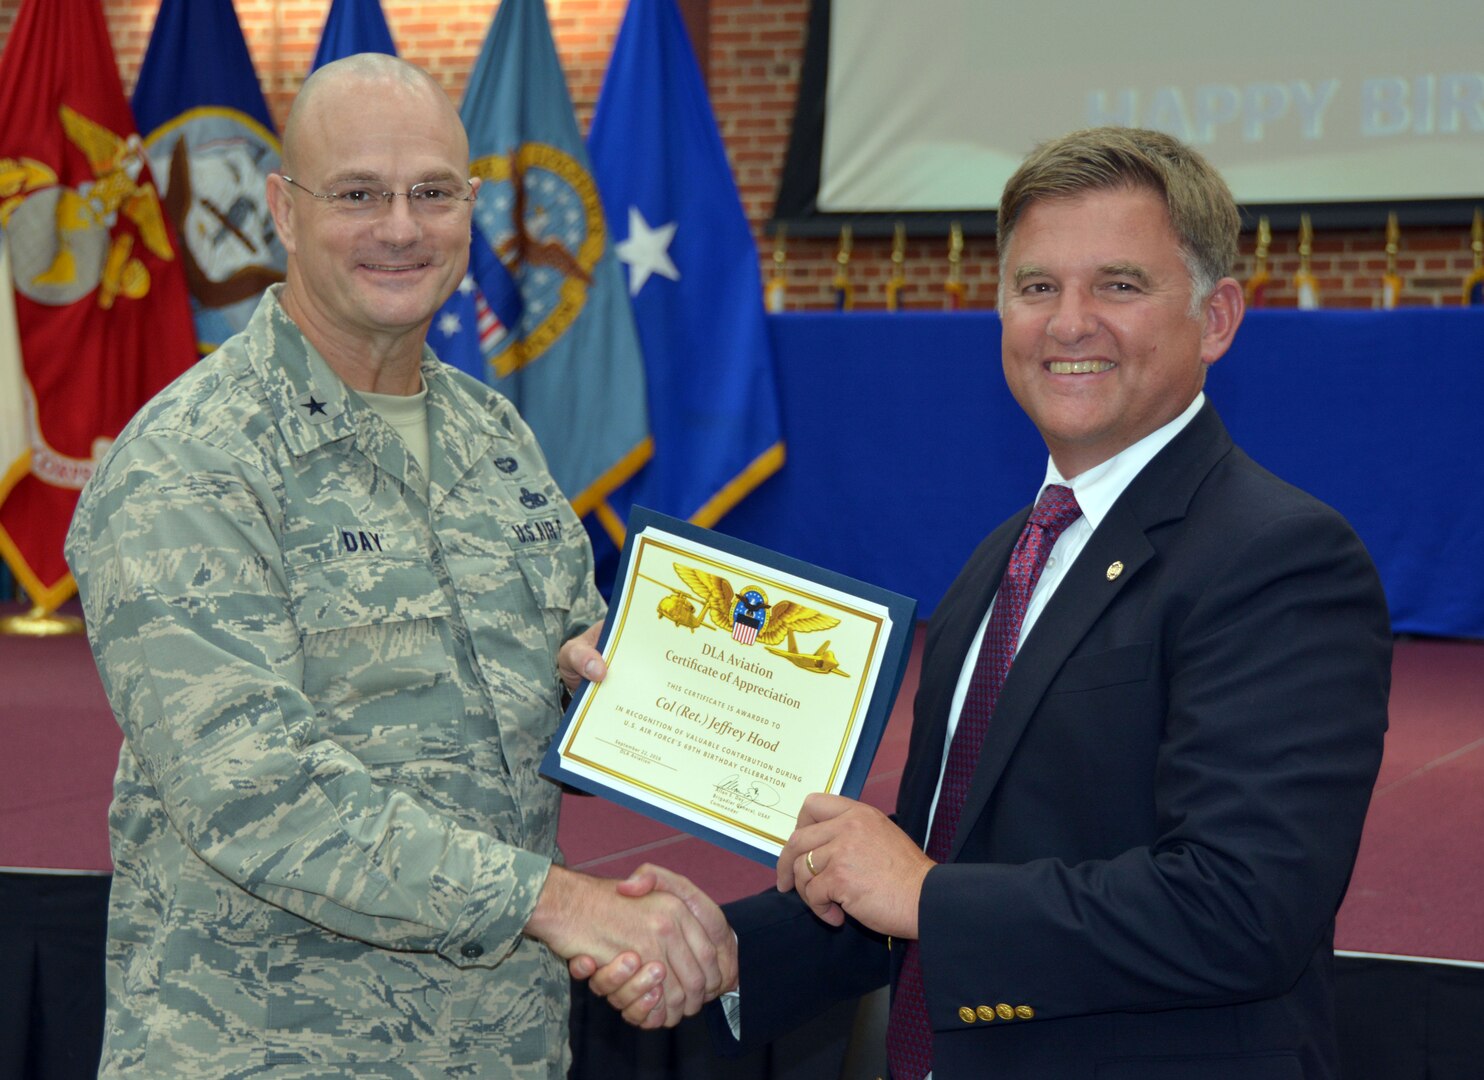 Defense Logistics Agency Aviation Commander Air Force Brig. Gen. Allan Day presents a certificate of appreciation to retired Air Force Col. Jeffrey Hood during the Air Force’s 69th birthday ceremony held at the Lotts Center on Defense Supply Center Richmond, Virginia, Sept. 22, 2016. Hood, a former pilot, served in the Air Force from 1986 until 2014. He was one of two guest speakers during the ceremony. 